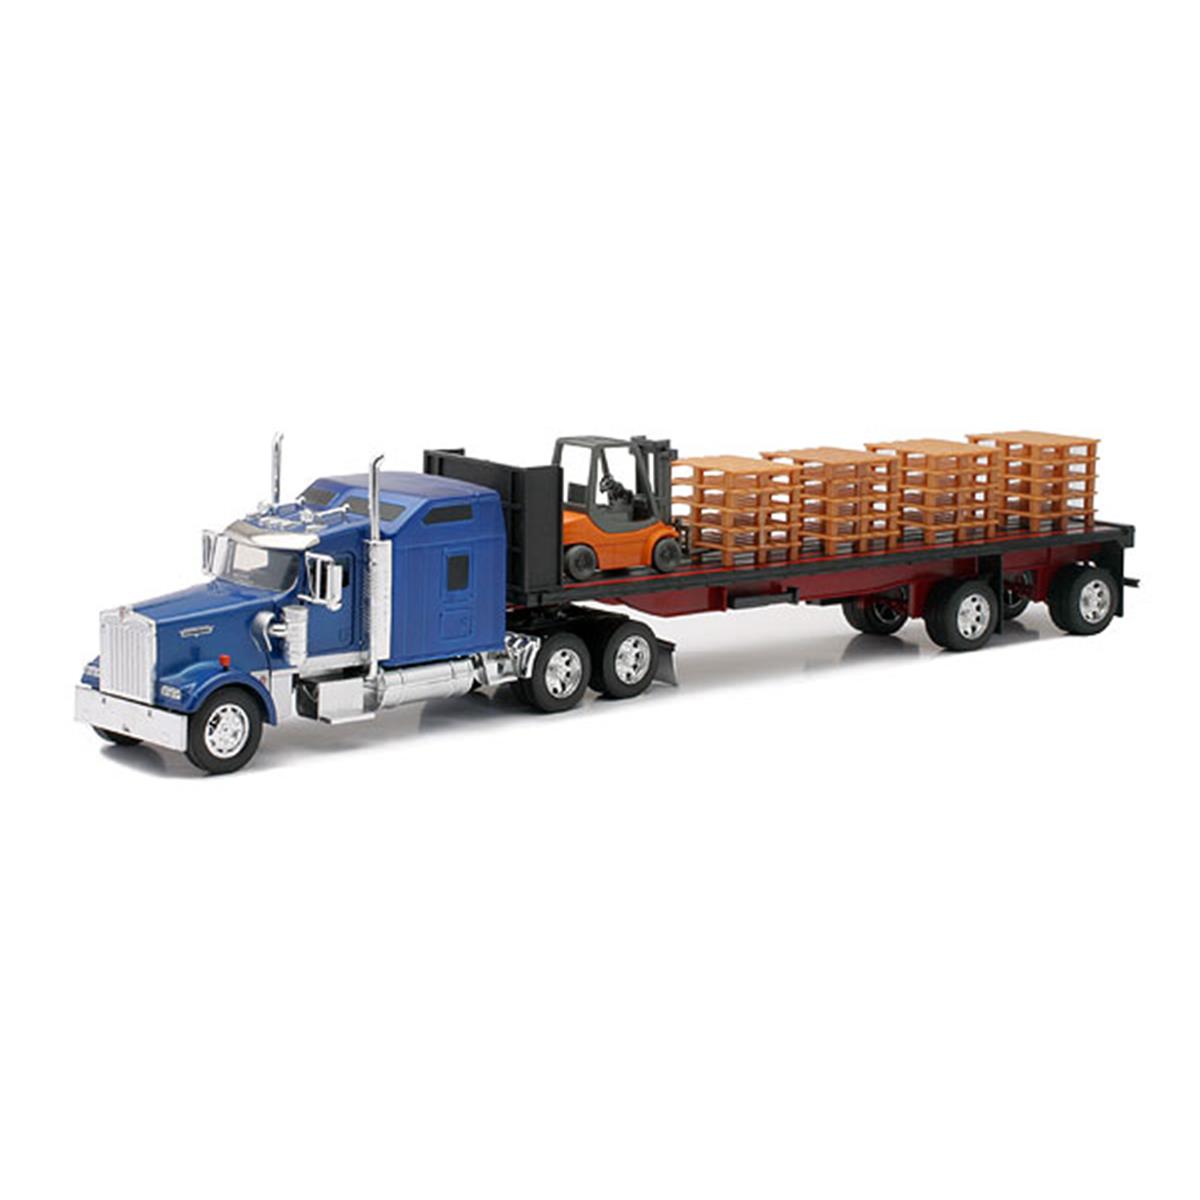 B2BReplicas NEWSS-10263A New-Ray Kenworth W900 with a Flatbed Trailer with Forklift & Pallets Model -  B2B Replicas